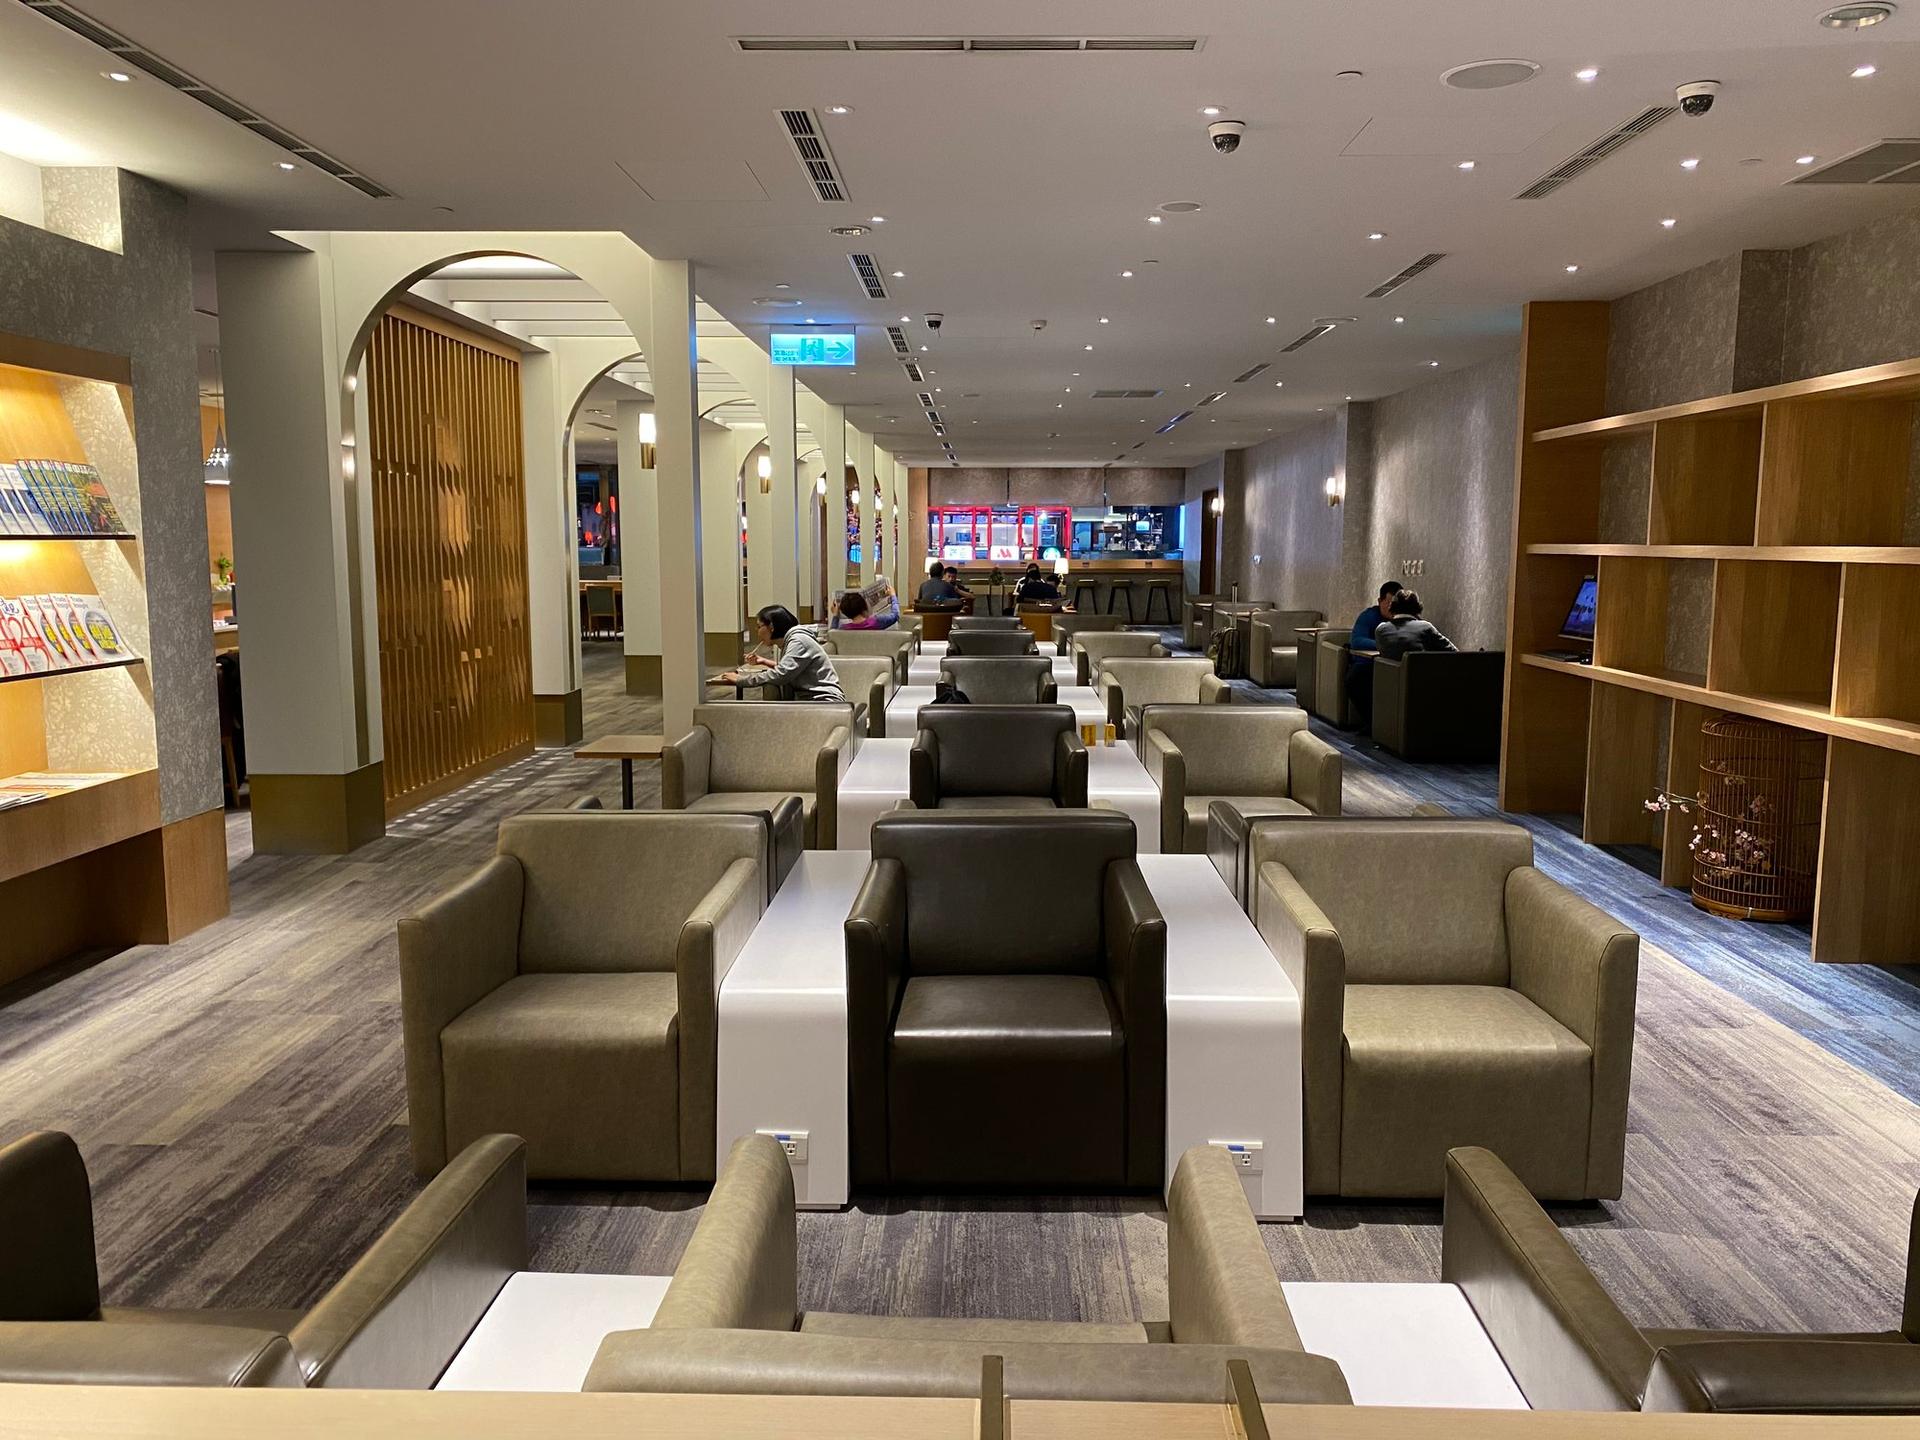 China Airlines Supreme Lounge (V3) image 21 of 21